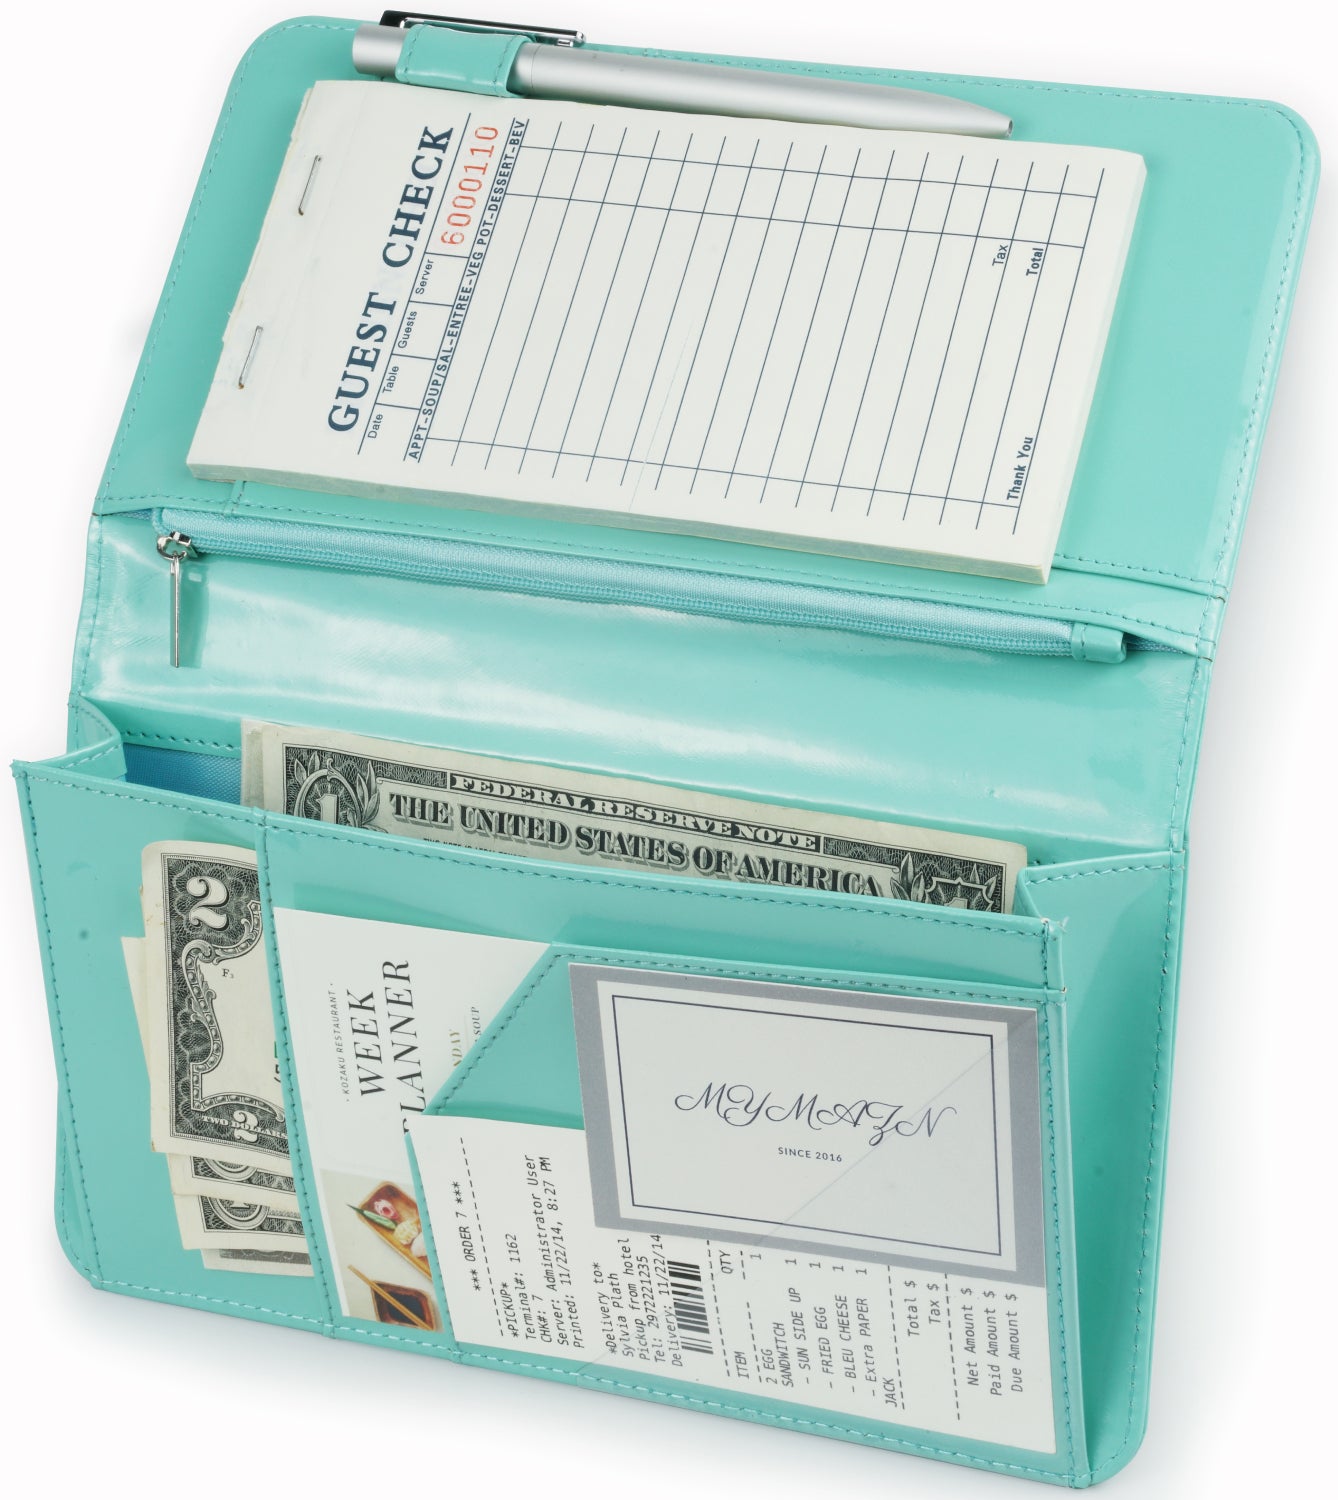 4.8x9" Soft Turquoise Server Book with Zipper&Magnetic